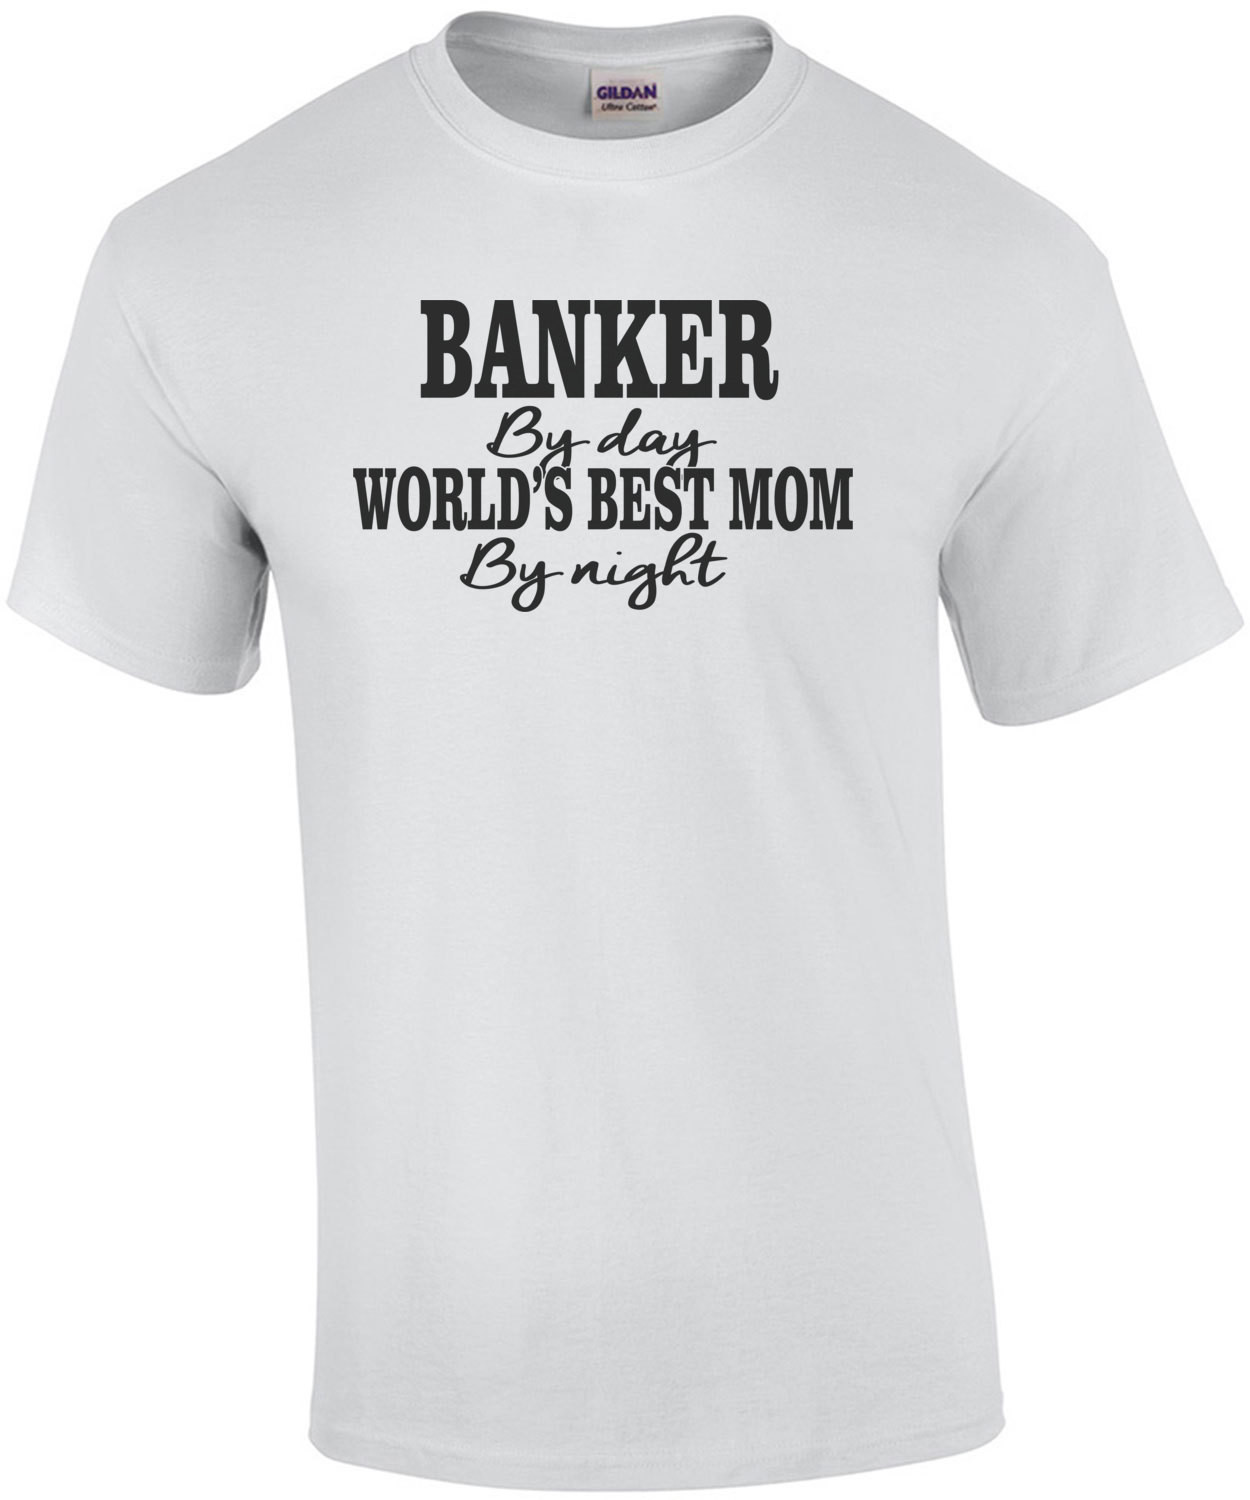 Banker By Day Worlds Best Mom By Night T-Shirt